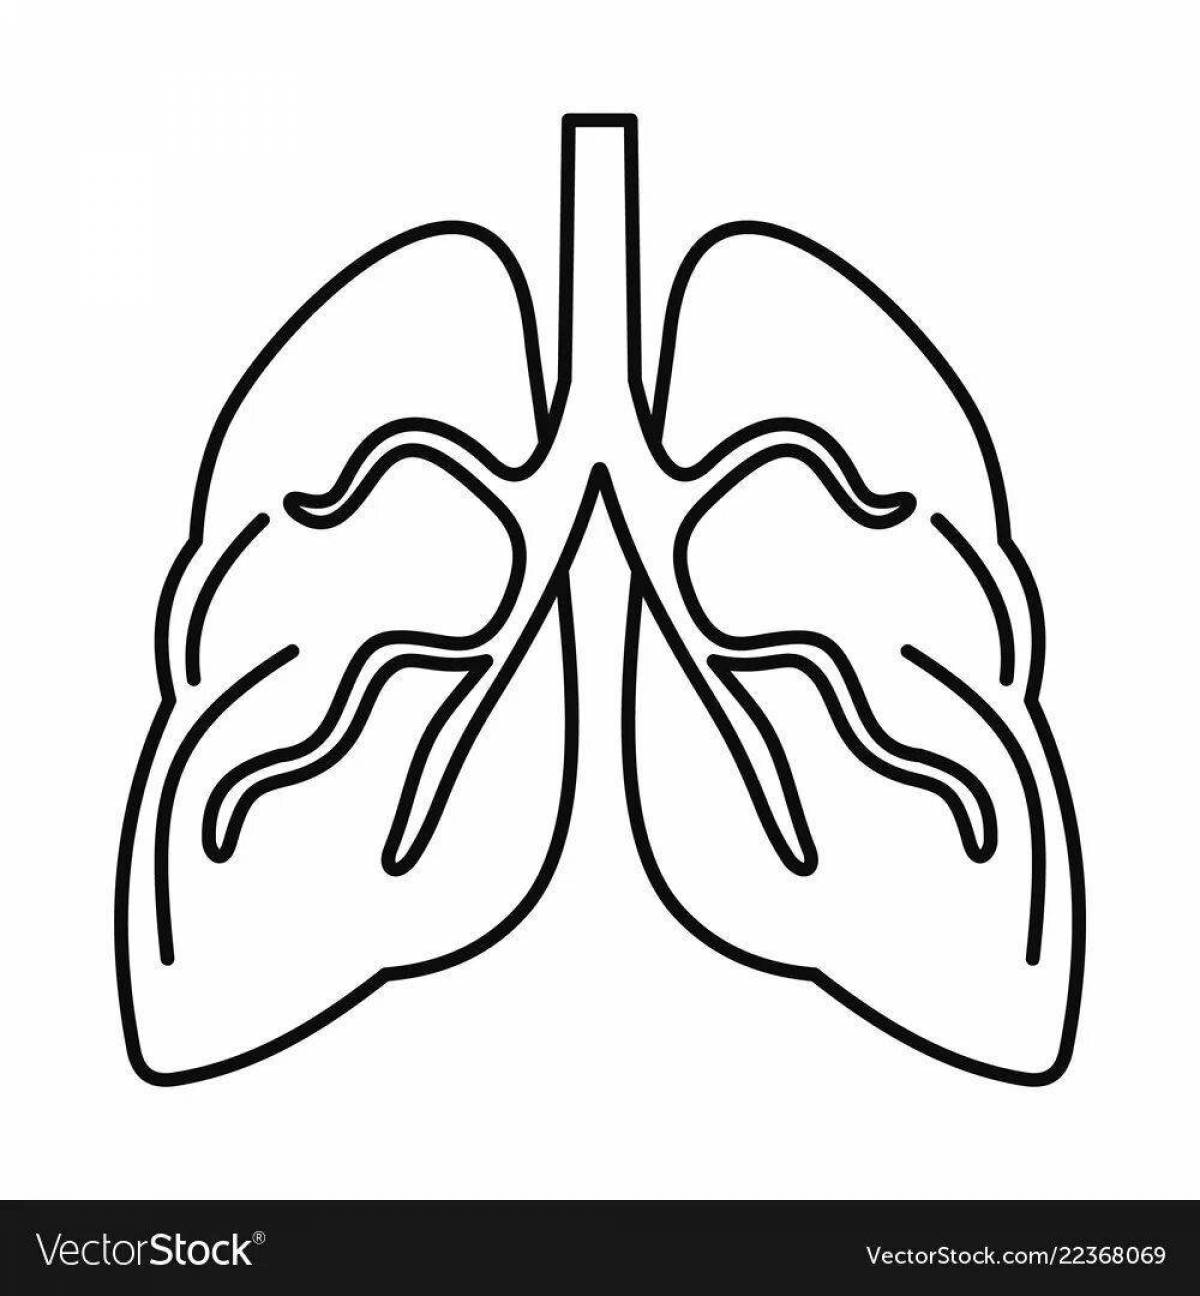 Human lungs for children #9